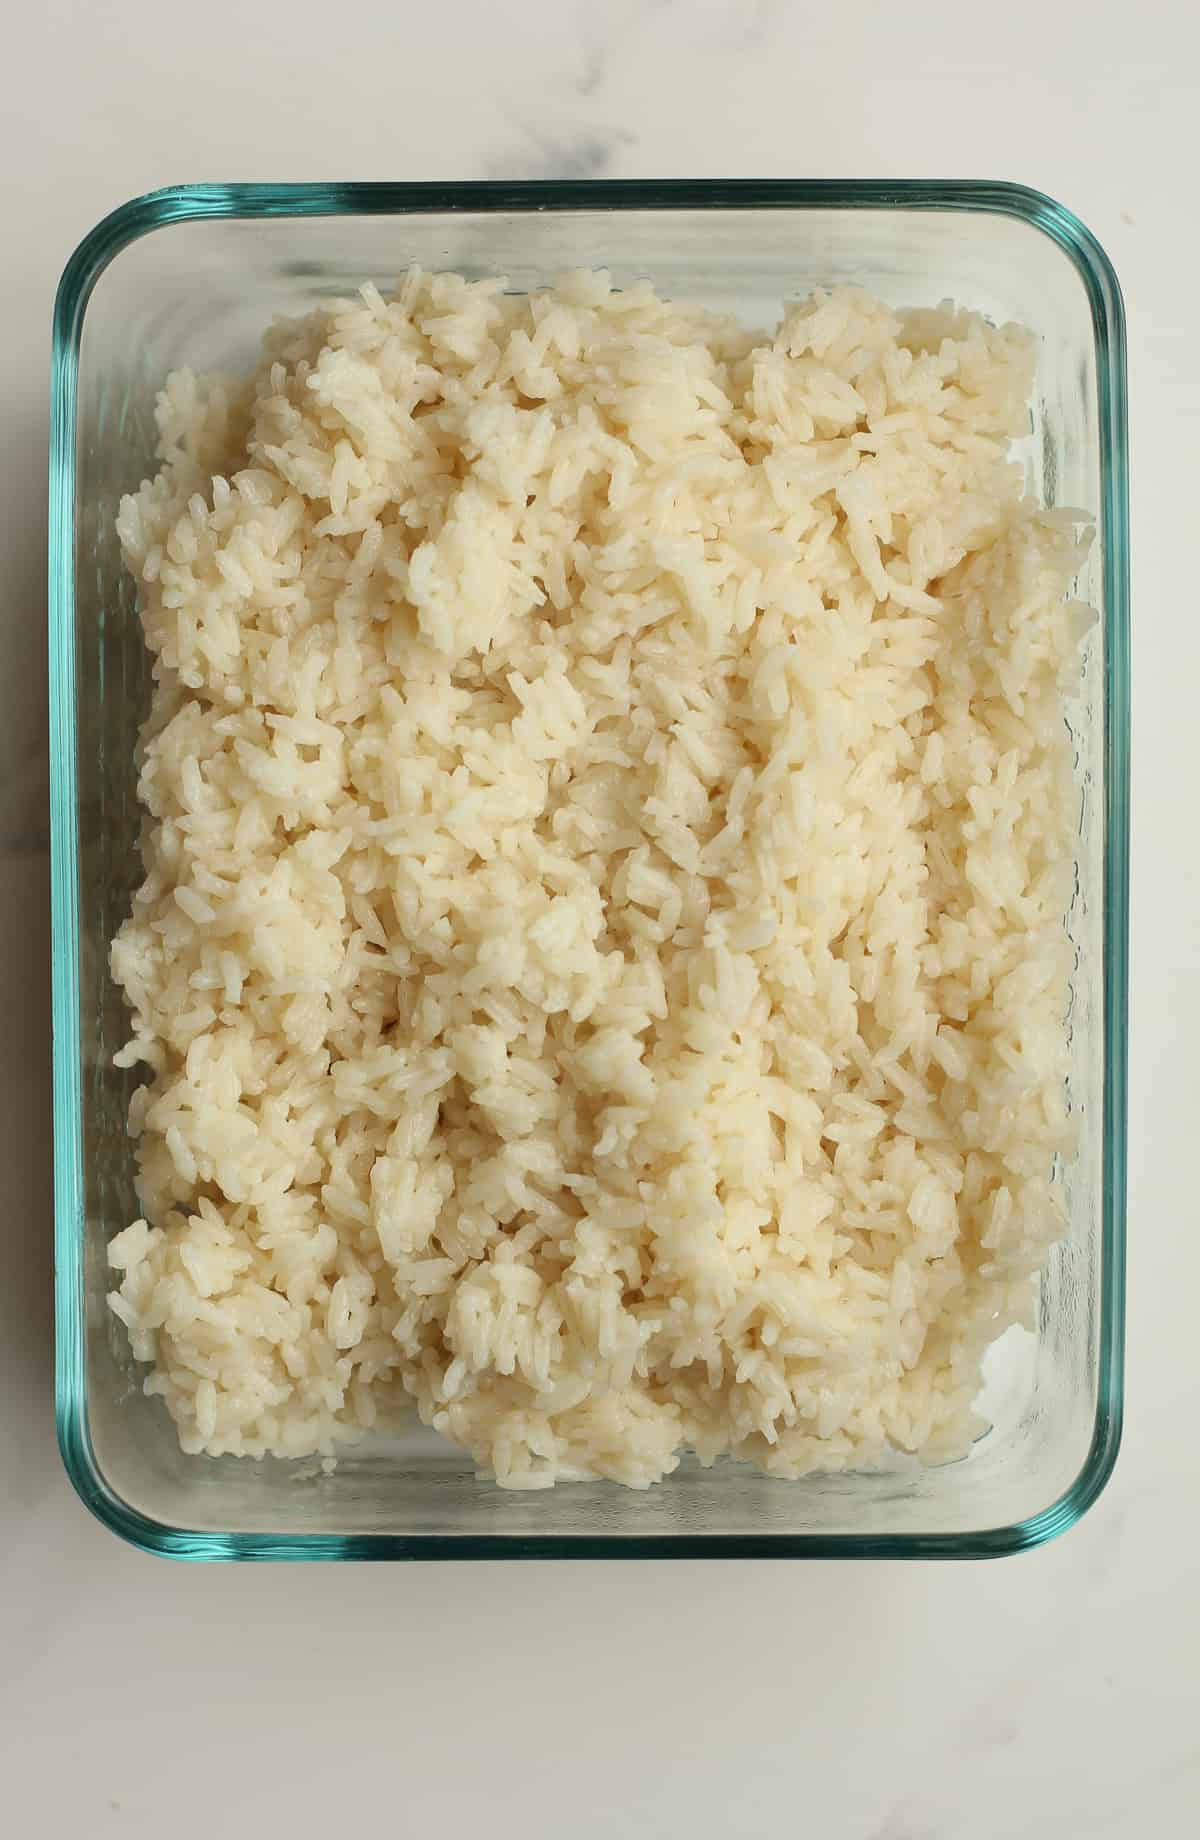 A dish of cooked white rice.